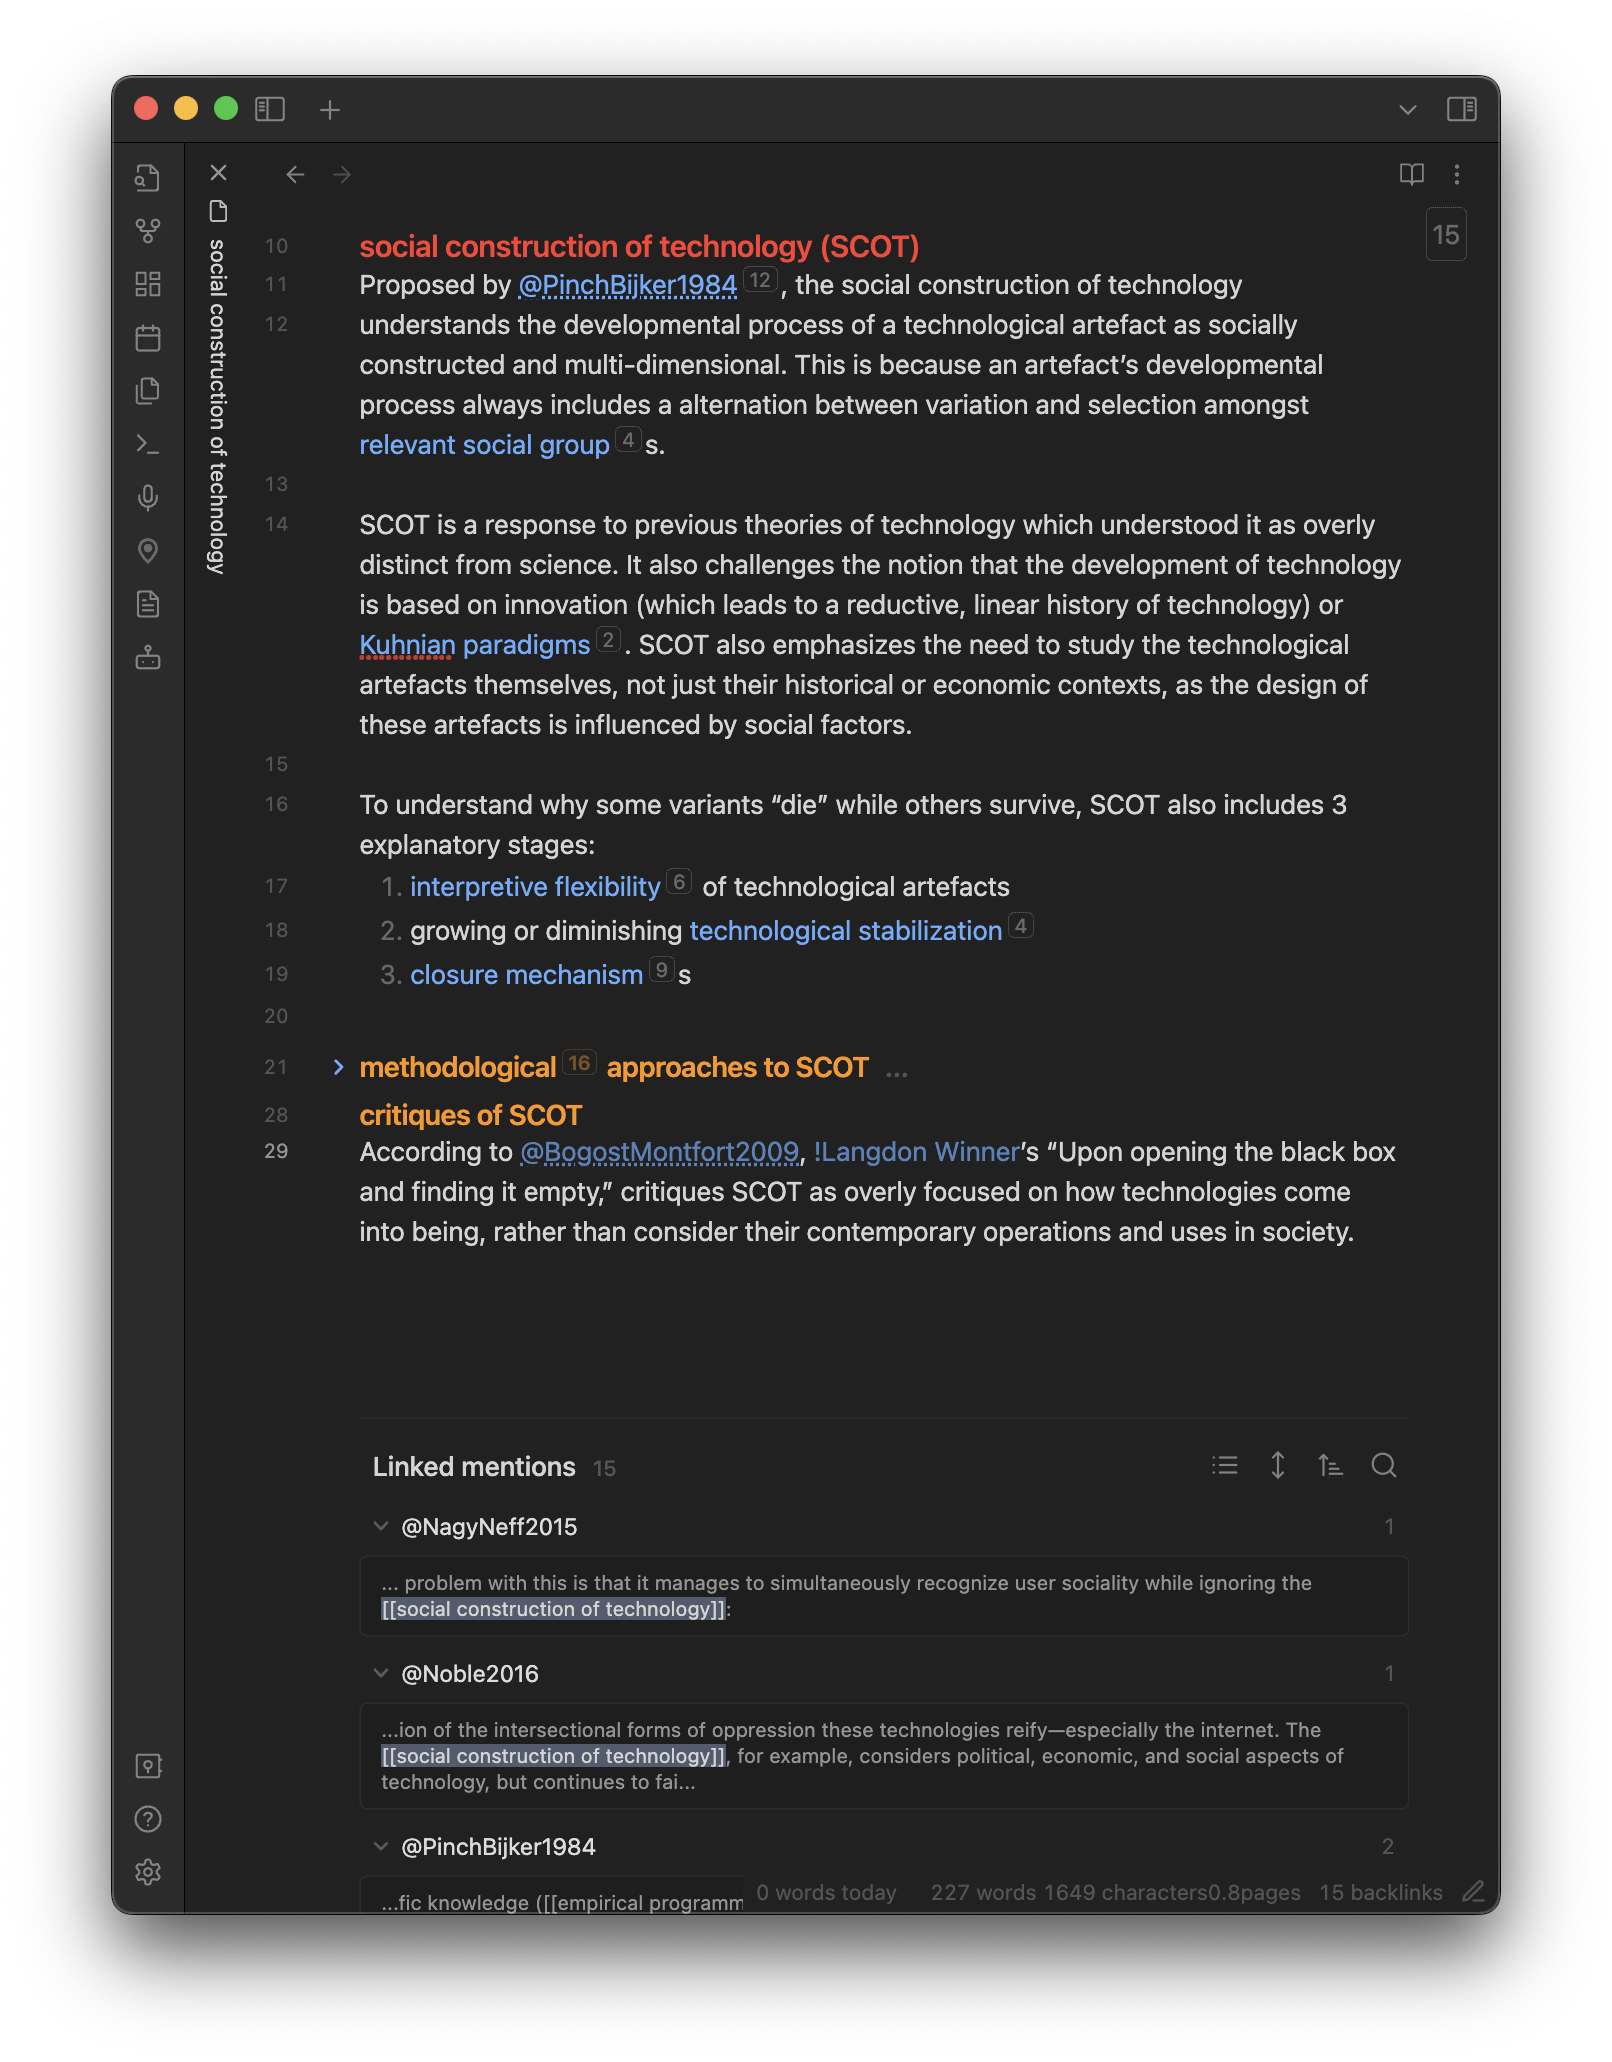 A screenshot fro Obsidian of a note titled &ldquo;social construction of technology (SCOT),&rdquo; which describes the theory with links to other concepts such as &ldquo;relevant social group&rdquo; and sources such as &ldquo;@PinchBijker1985.&rdquo;